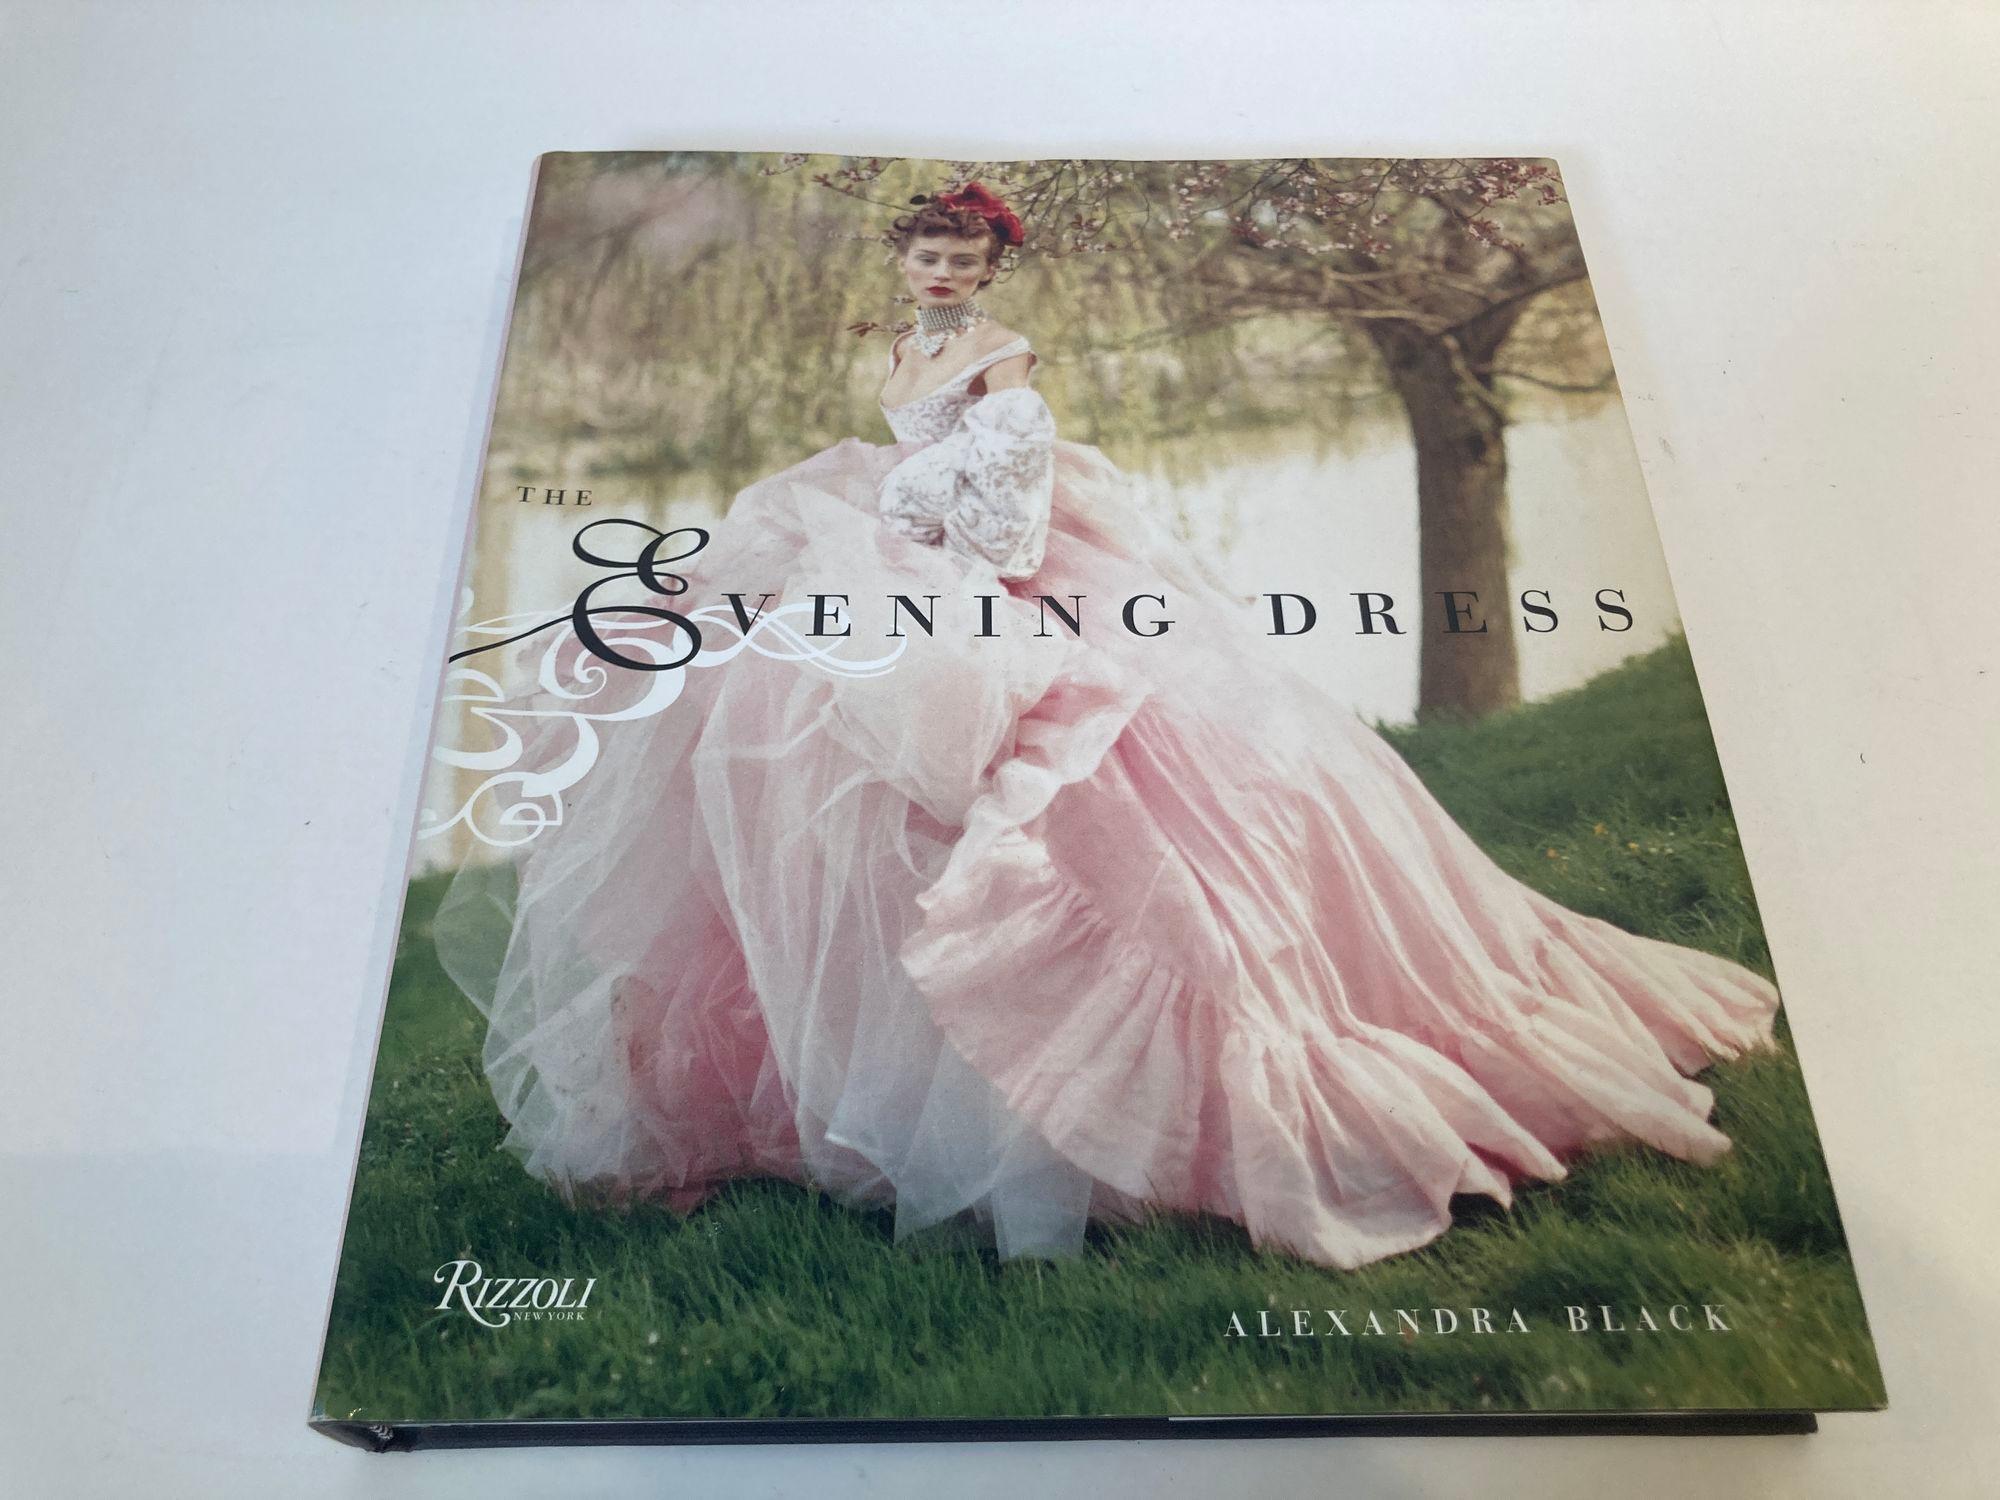 Contemporary Evening Dress Hardcover Book First Edition By Alexandra Black, 2004 Rizzoli For Sale